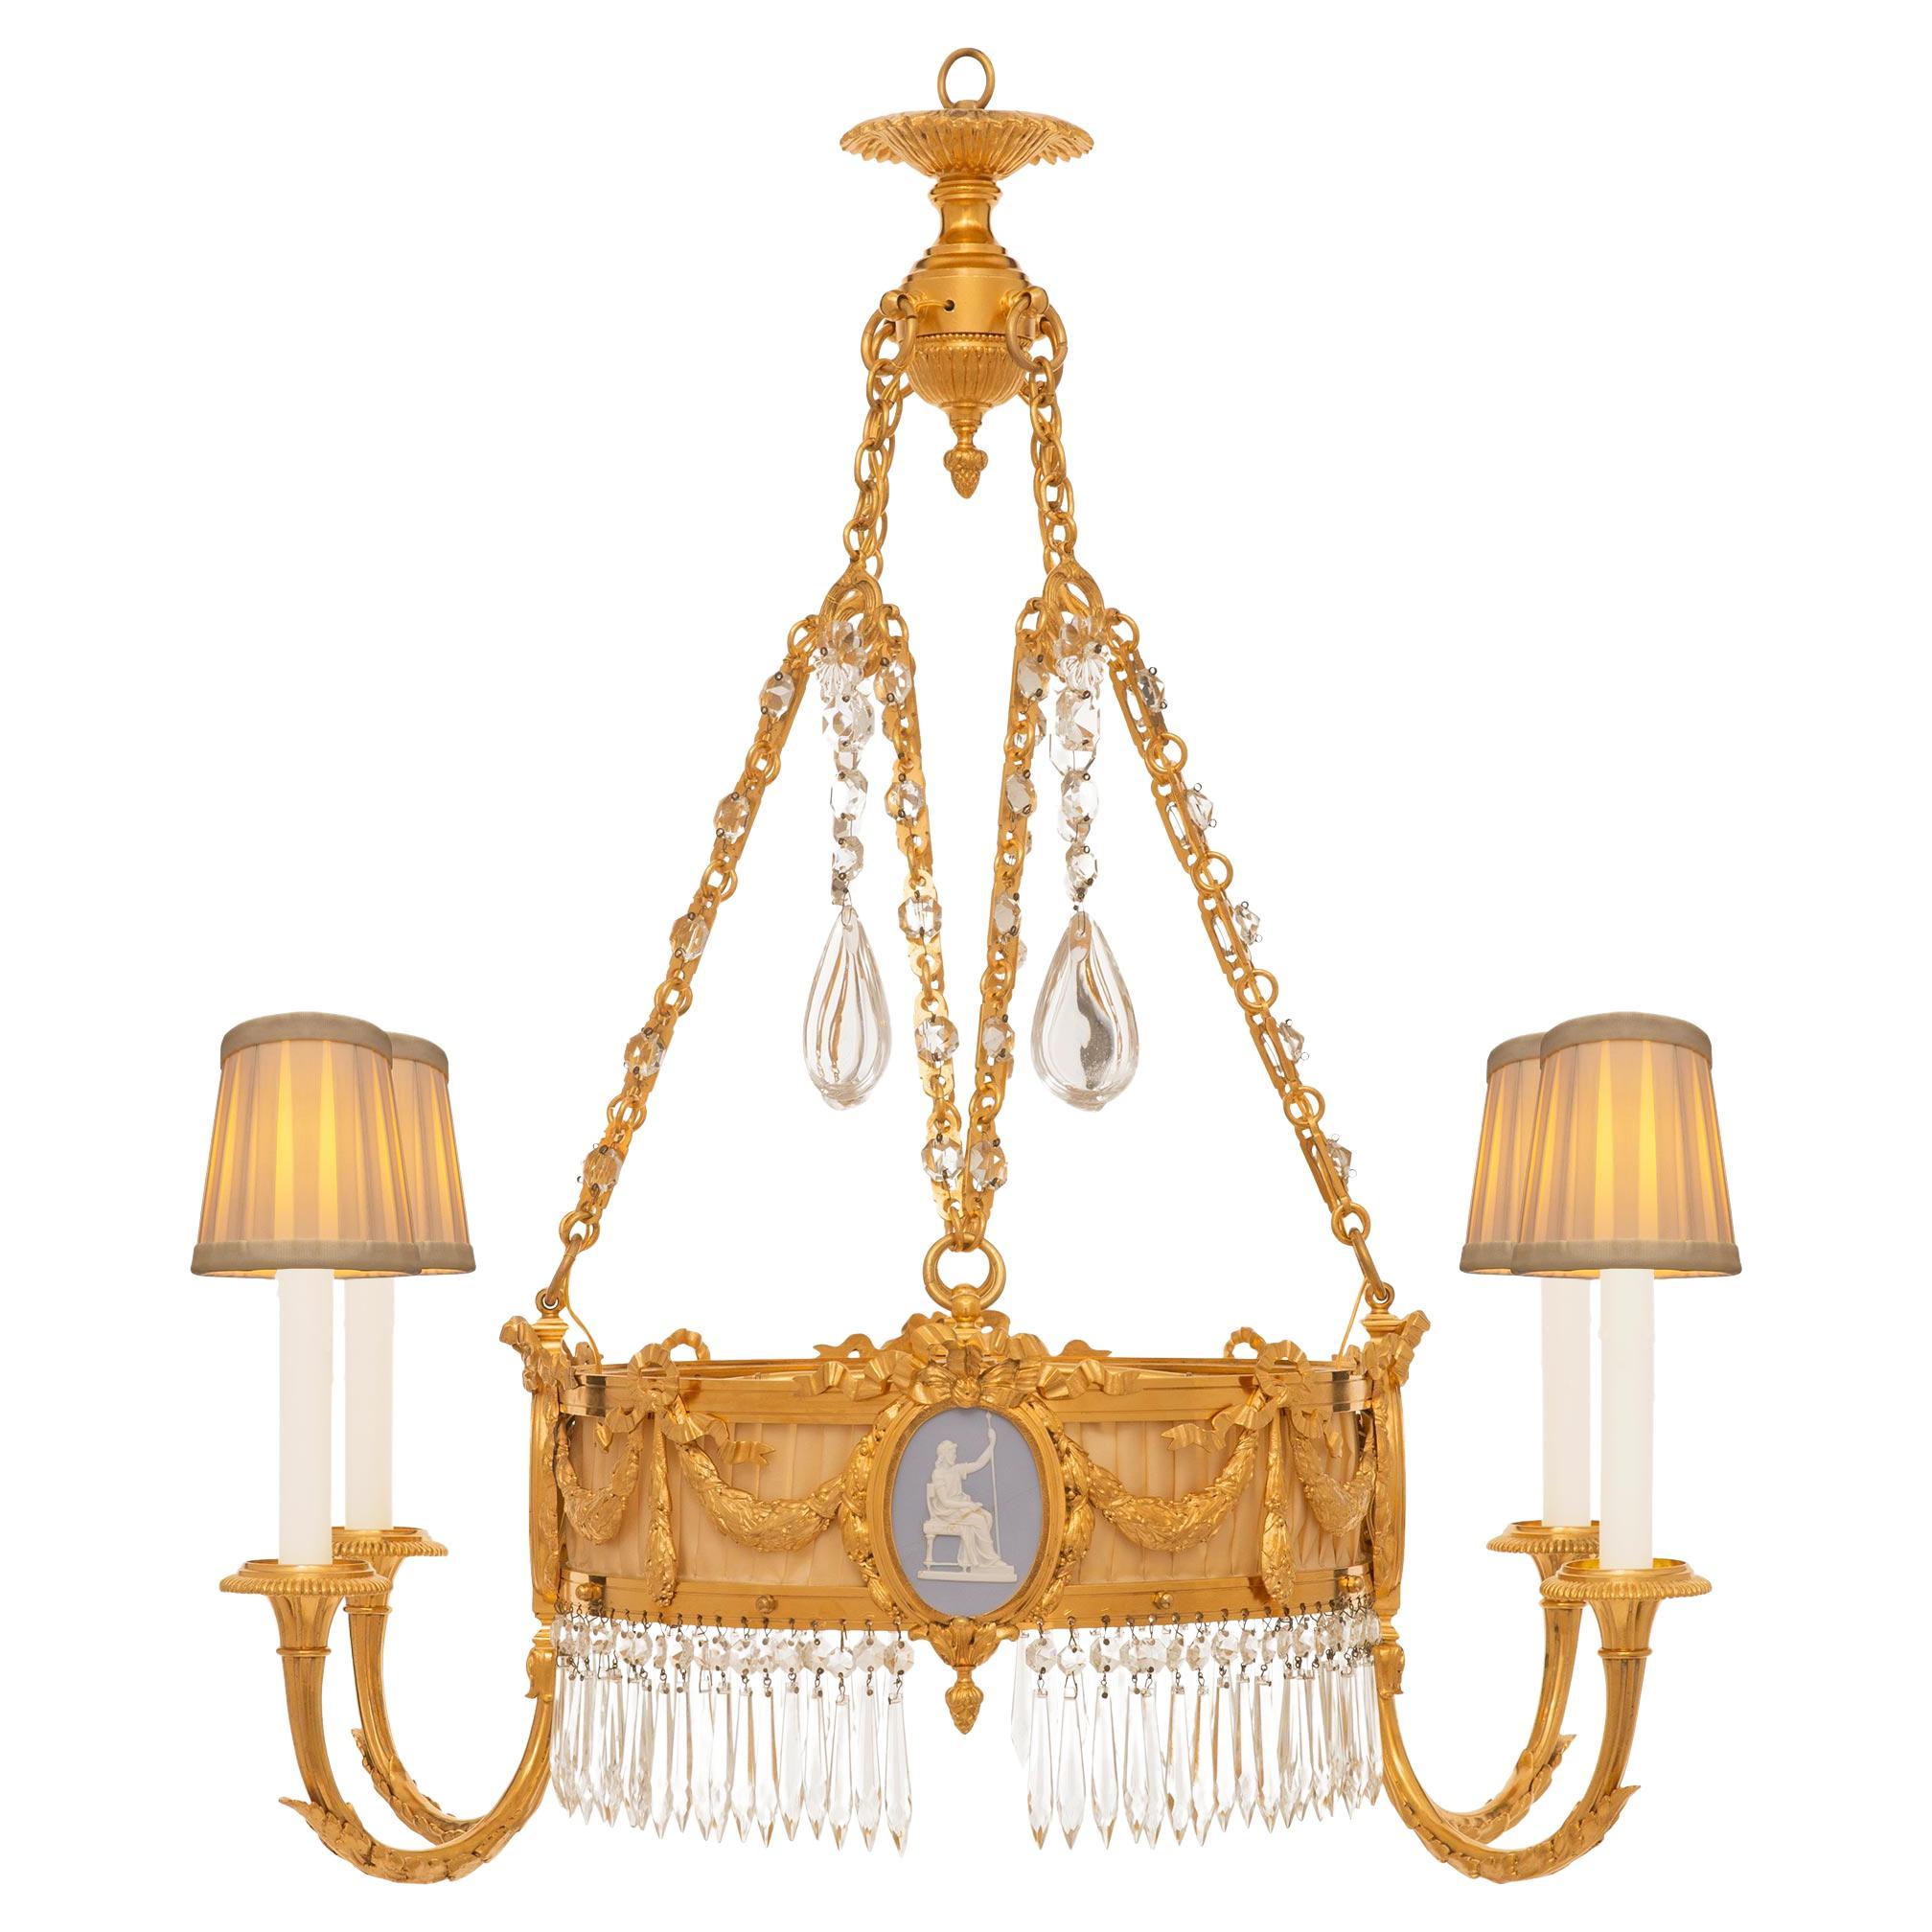 A French 19th century Louis XVI st. crystal chandelier For Sale